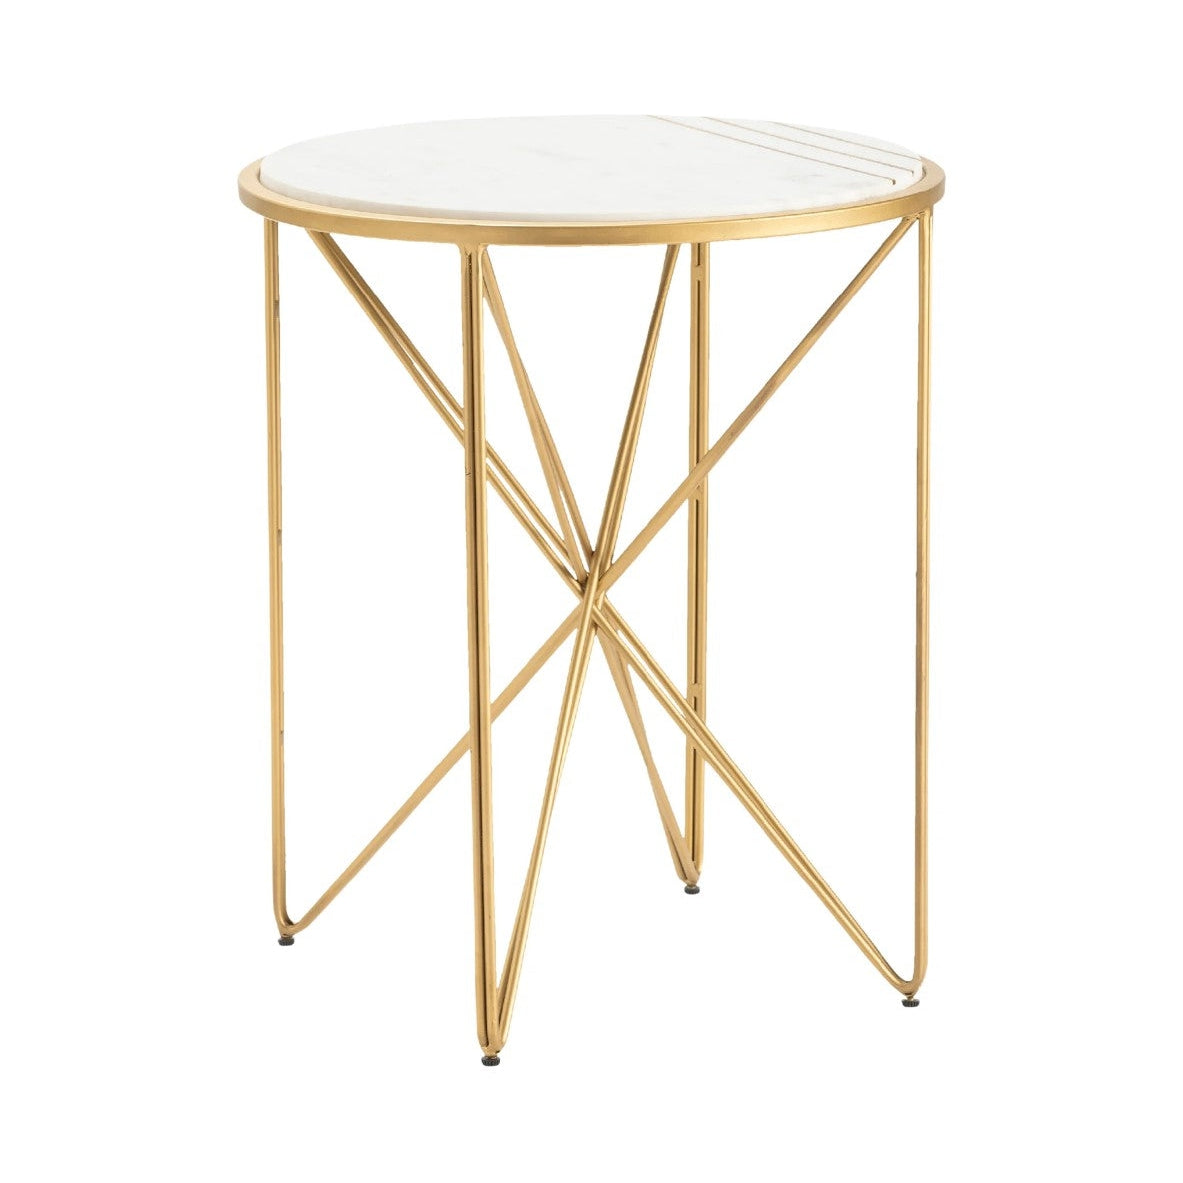 Crestview Collection Darby 20" x 20" x 24" Modern Marble And Iron Accent Table In White and Gold Finish